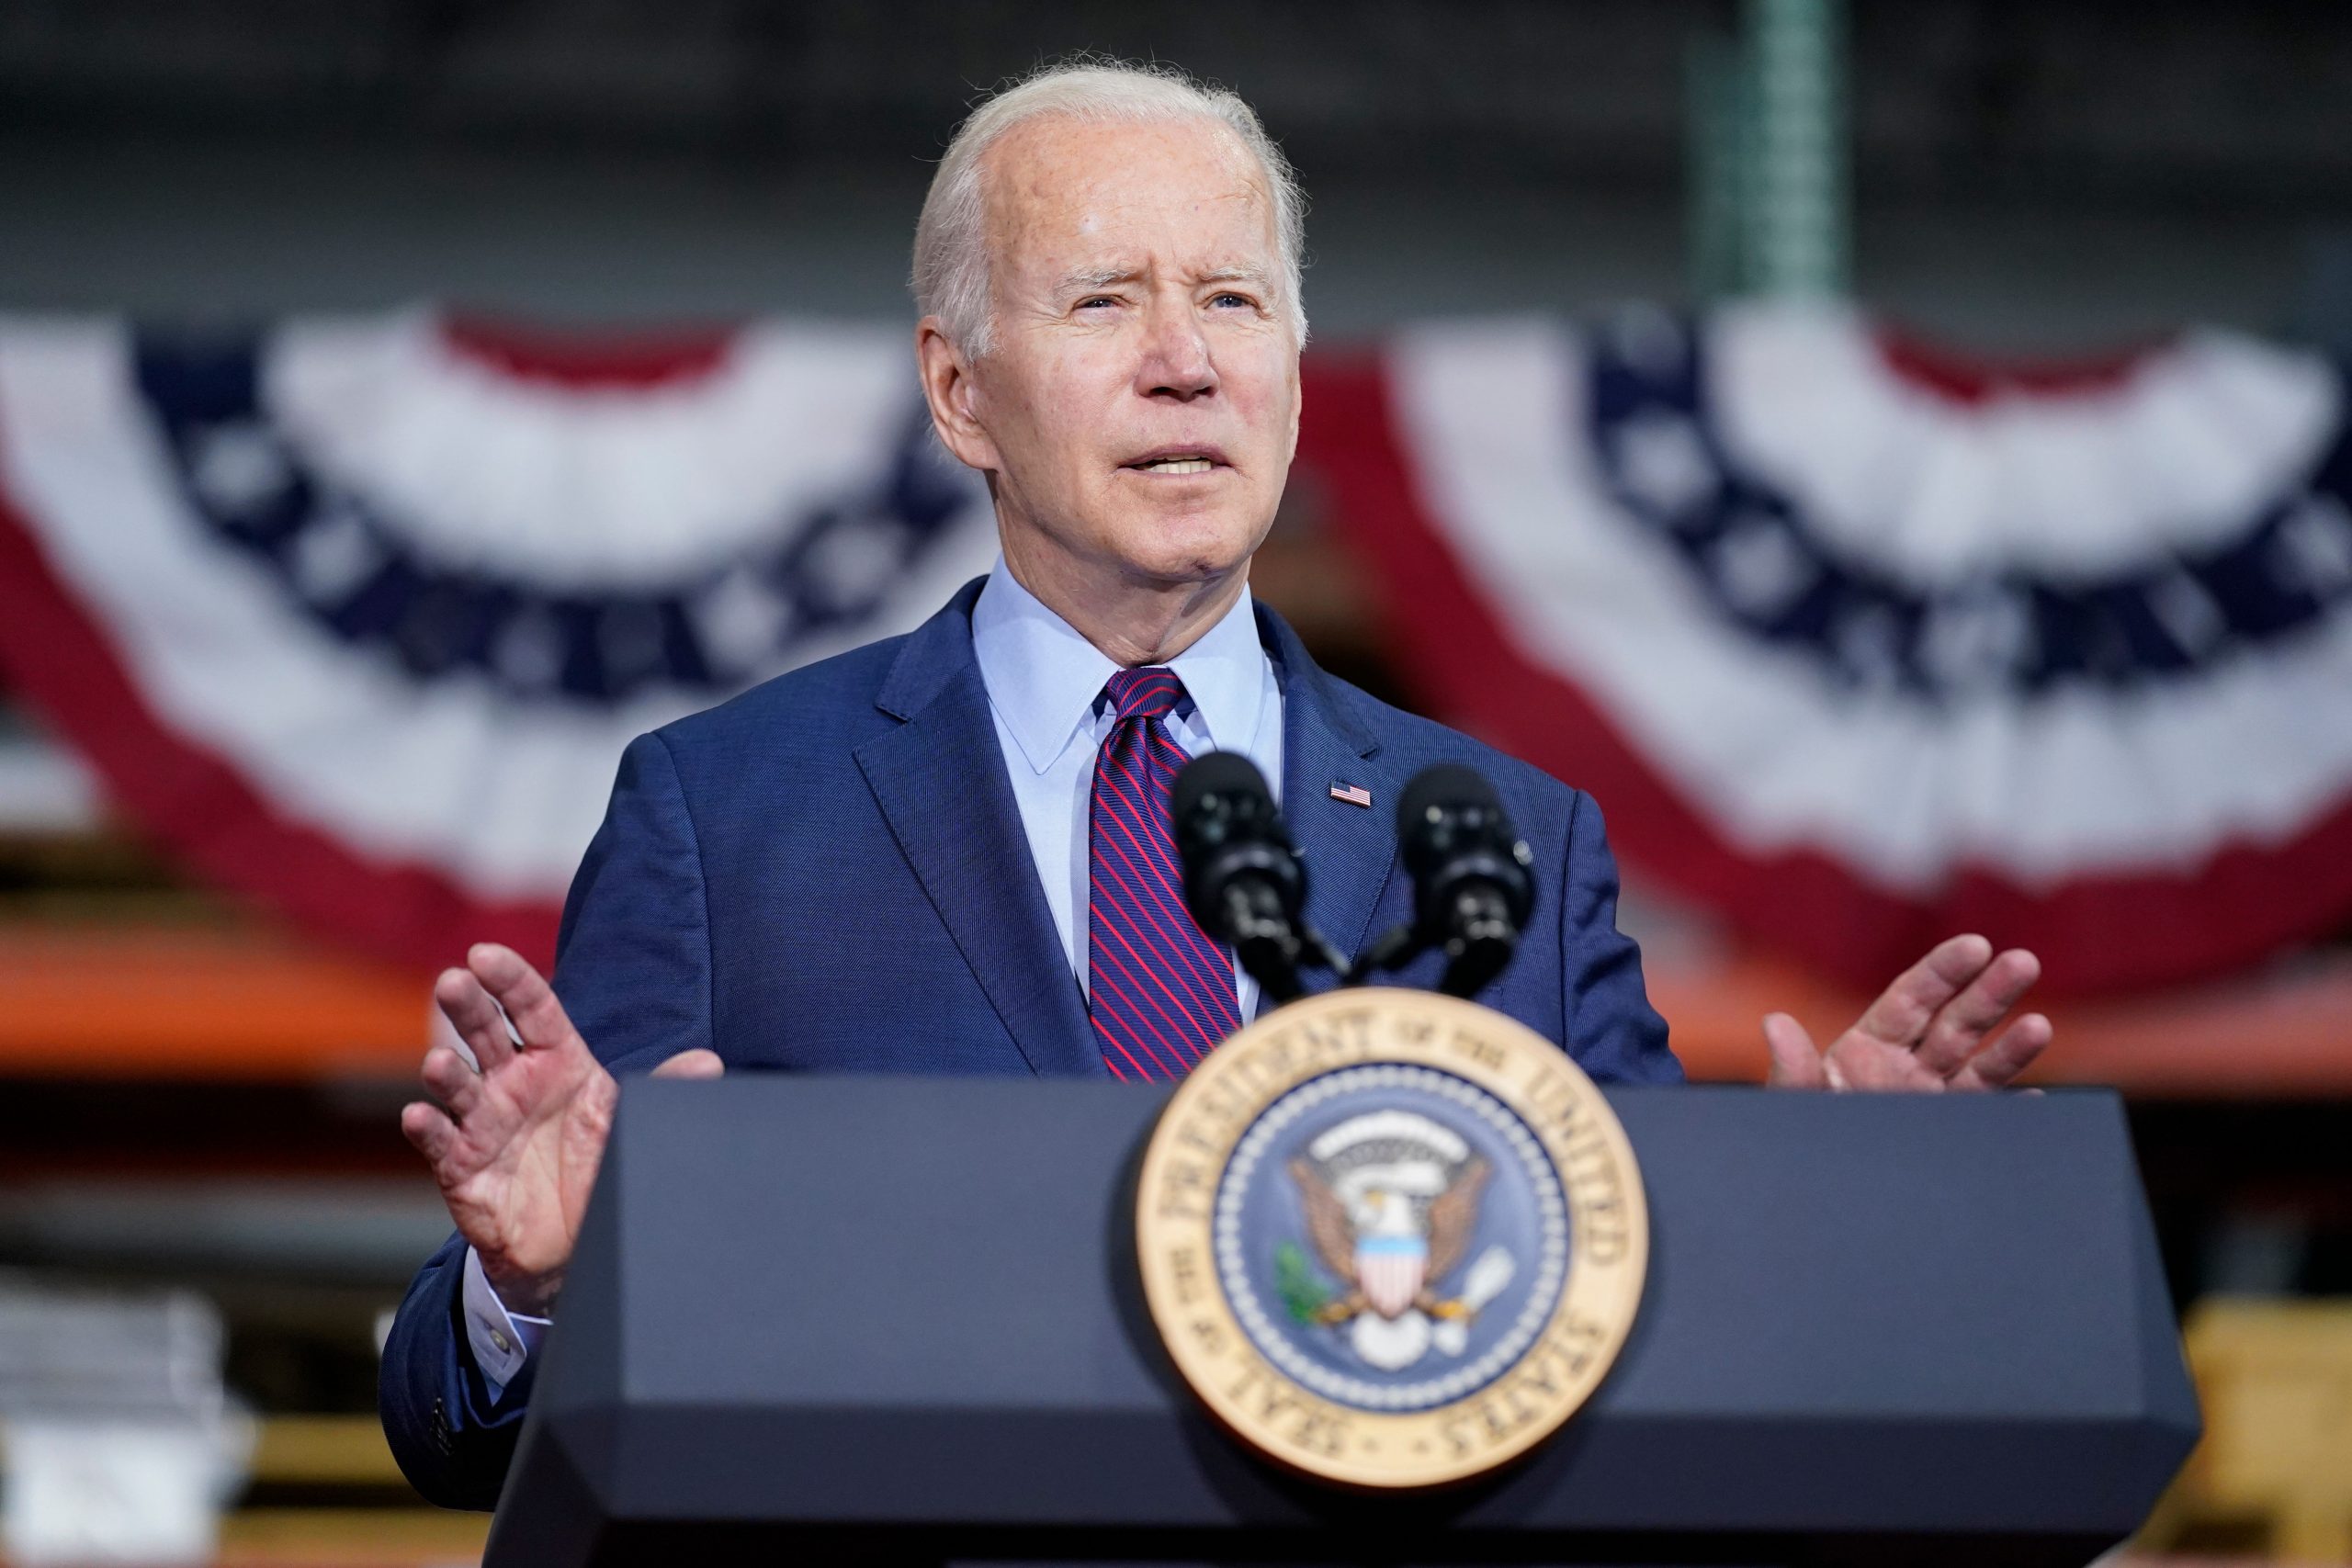 Americas Summit: Biden, leaders agree on migration pact to host refugees